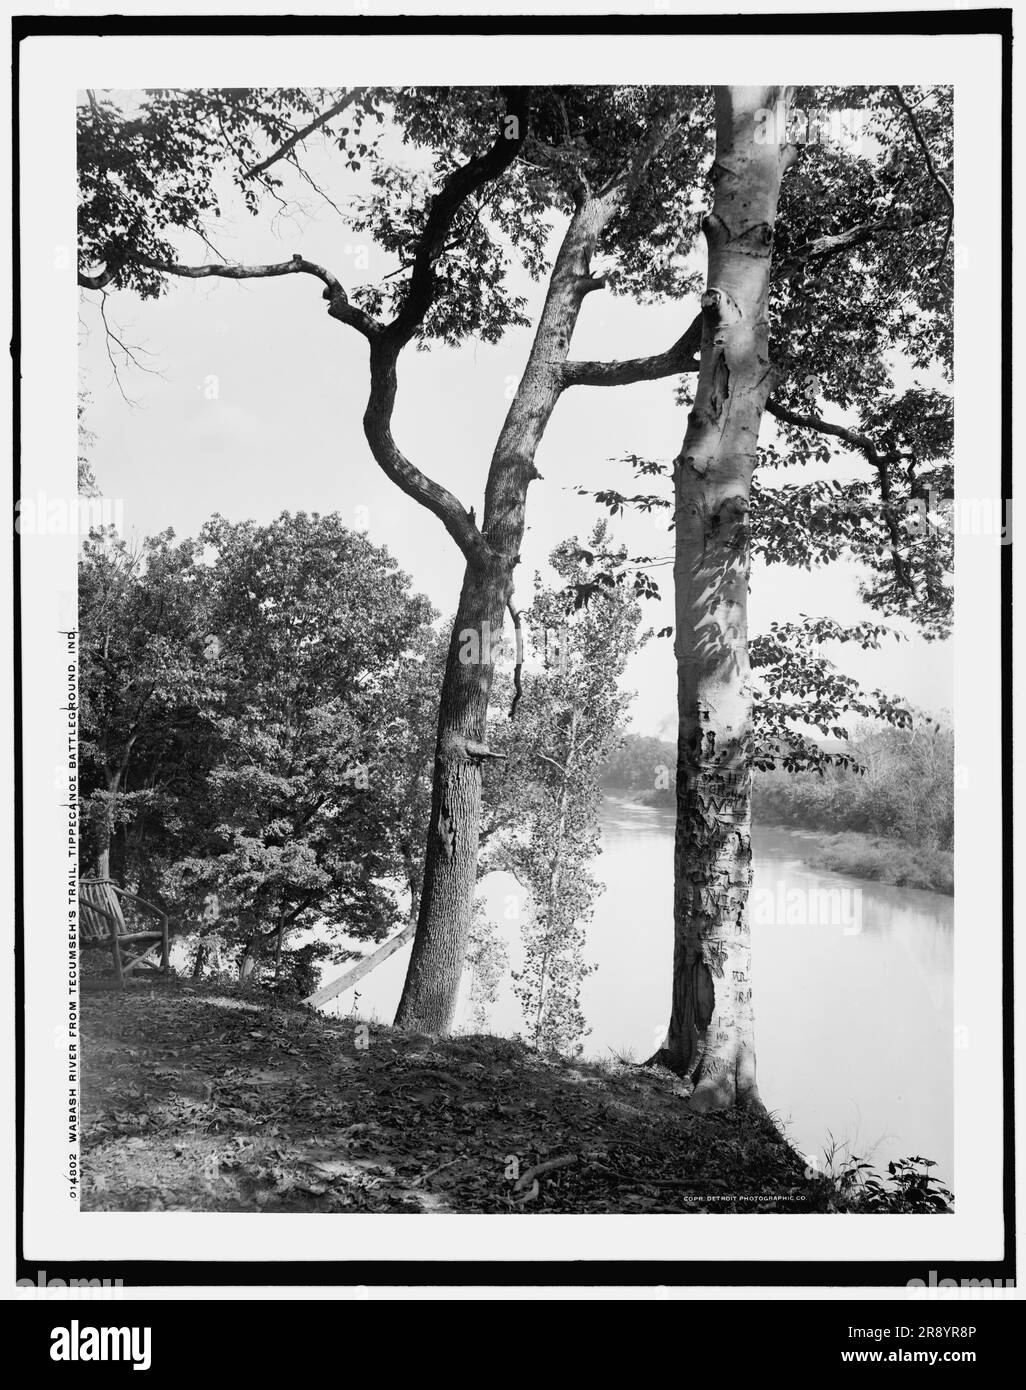 Wabash River from Tecumseh's Trail, Tippecanoe battleground, Ind., c1902. The Battle of Tippecanoe was fought in 1811, in Battle Ground, Indiana, between American forces led by then Governor William Henry Harrison of the Indiana Territory and Native American forces associated with Shawnee leader Tecumseh and his brother Tenskwatawa, leaders of a confederacy of tribes who opposed European-American settlement of the American frontier. Note wooden seat on left, and graffiti on tree. Stock Photo